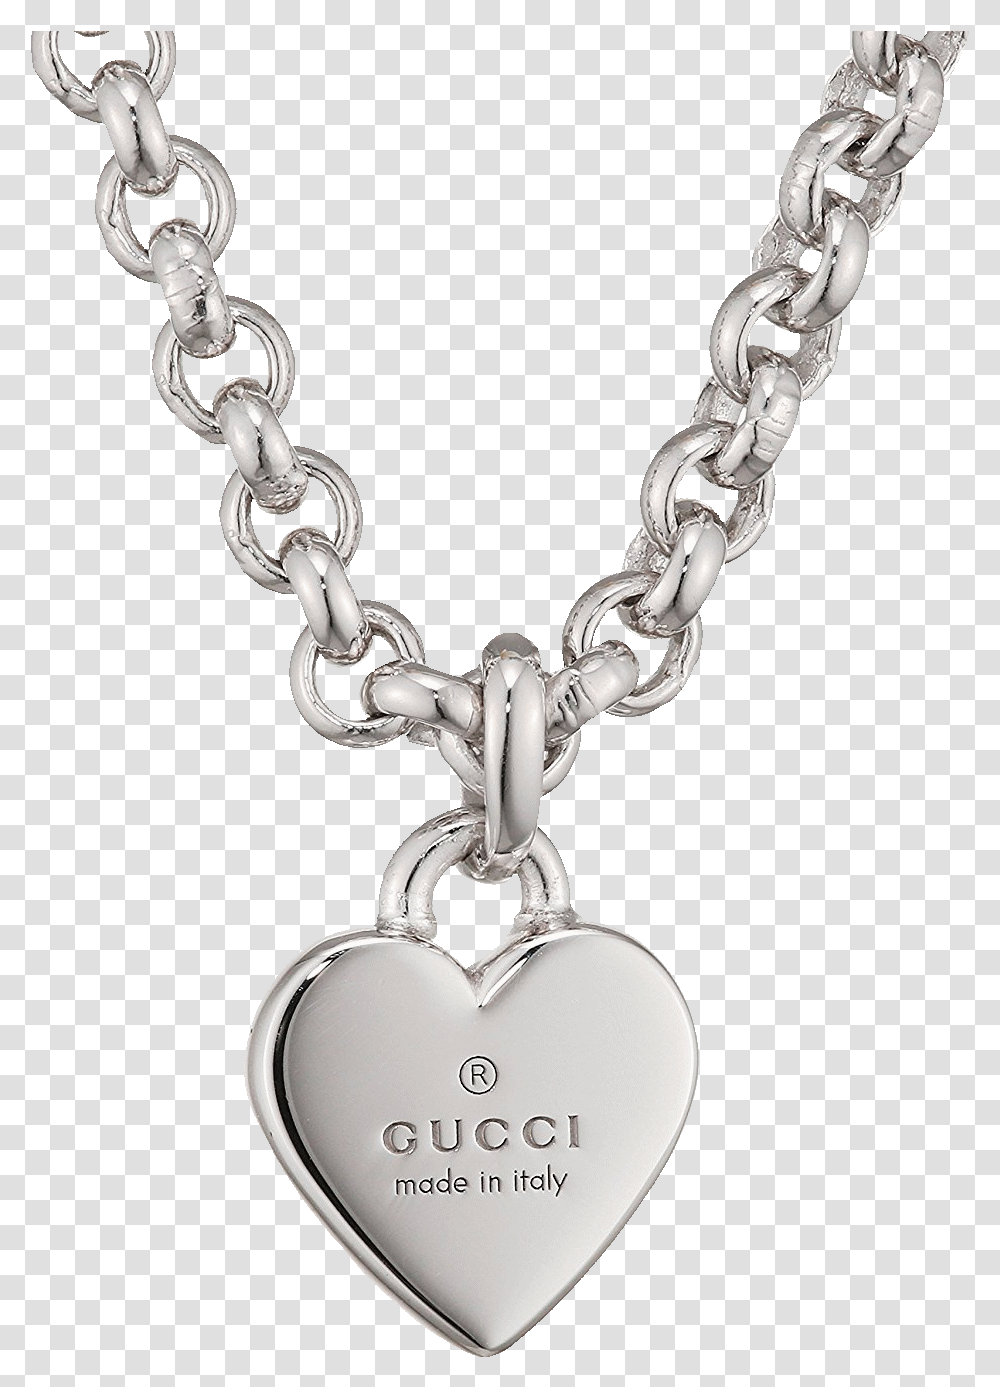 Gucci Trademark Necklace Gucci Sterling Silver Trademark Heart Necklet, Pendant, Chain, Accessories, Accessory Transparent Png